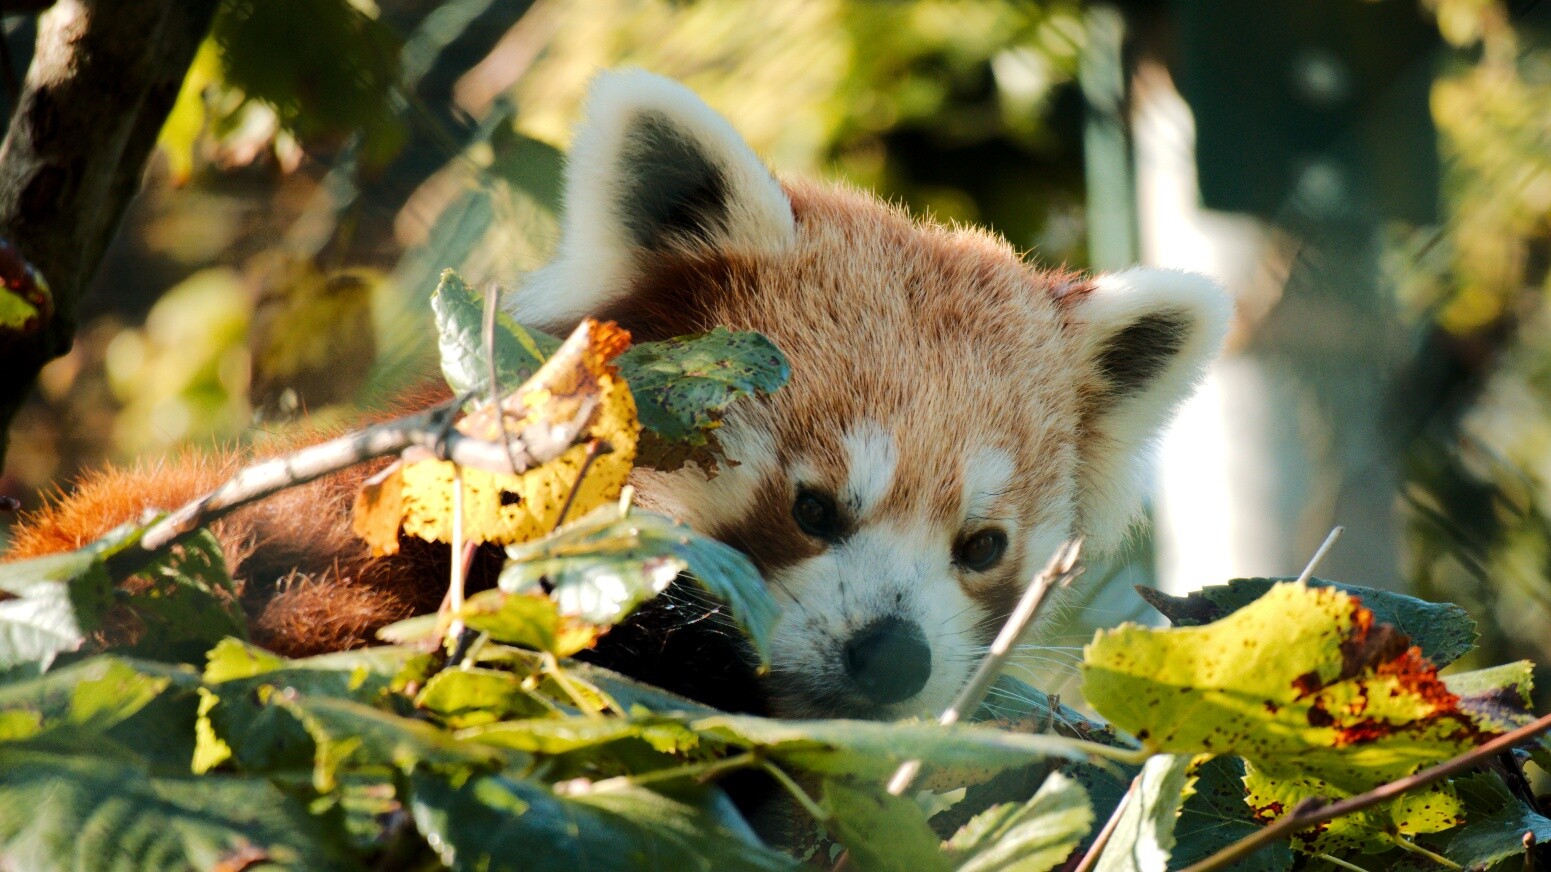 A Red Panda has made itself comfortable in a leafy tree on the branch. Green leaves surround him. Curiously, he looks down at the zoo visitors.